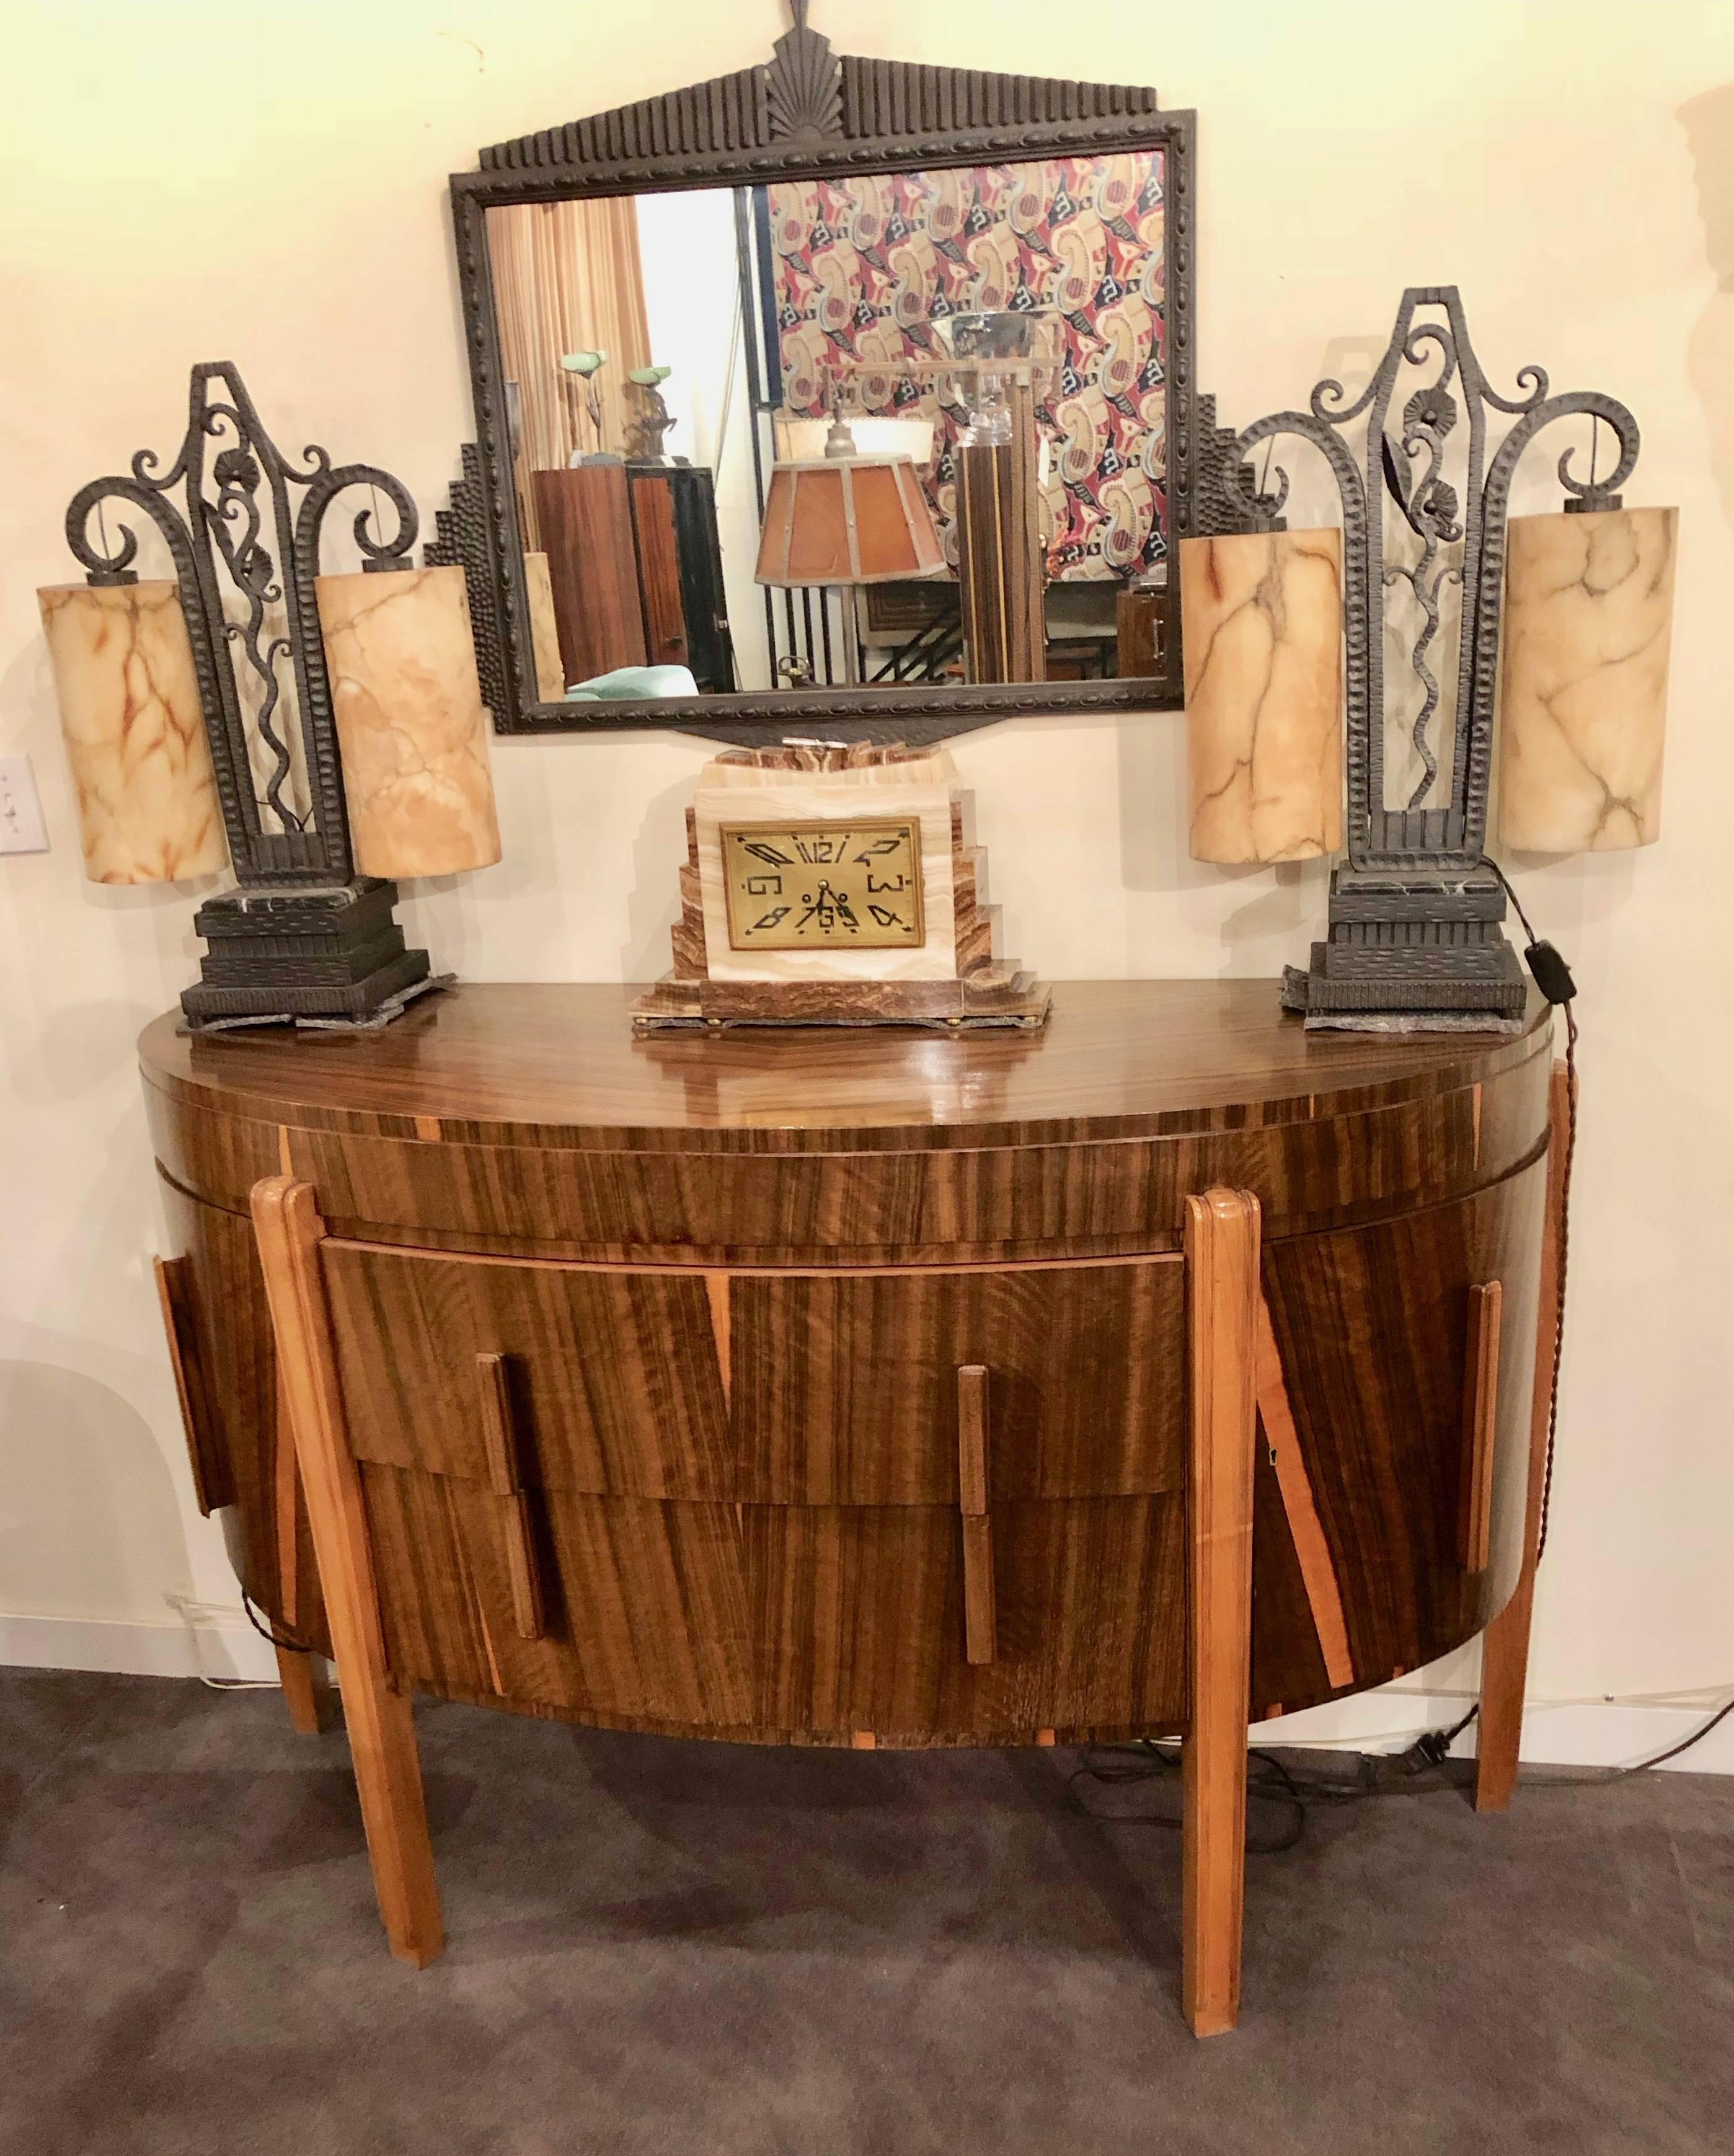 Unique demilune Art Deco buffet storage cabinet. I believe of English original in a super intensely grained first growth Macassar wood. Was originally used as part of dining room set, but could be adapted for any space where you might be looking for